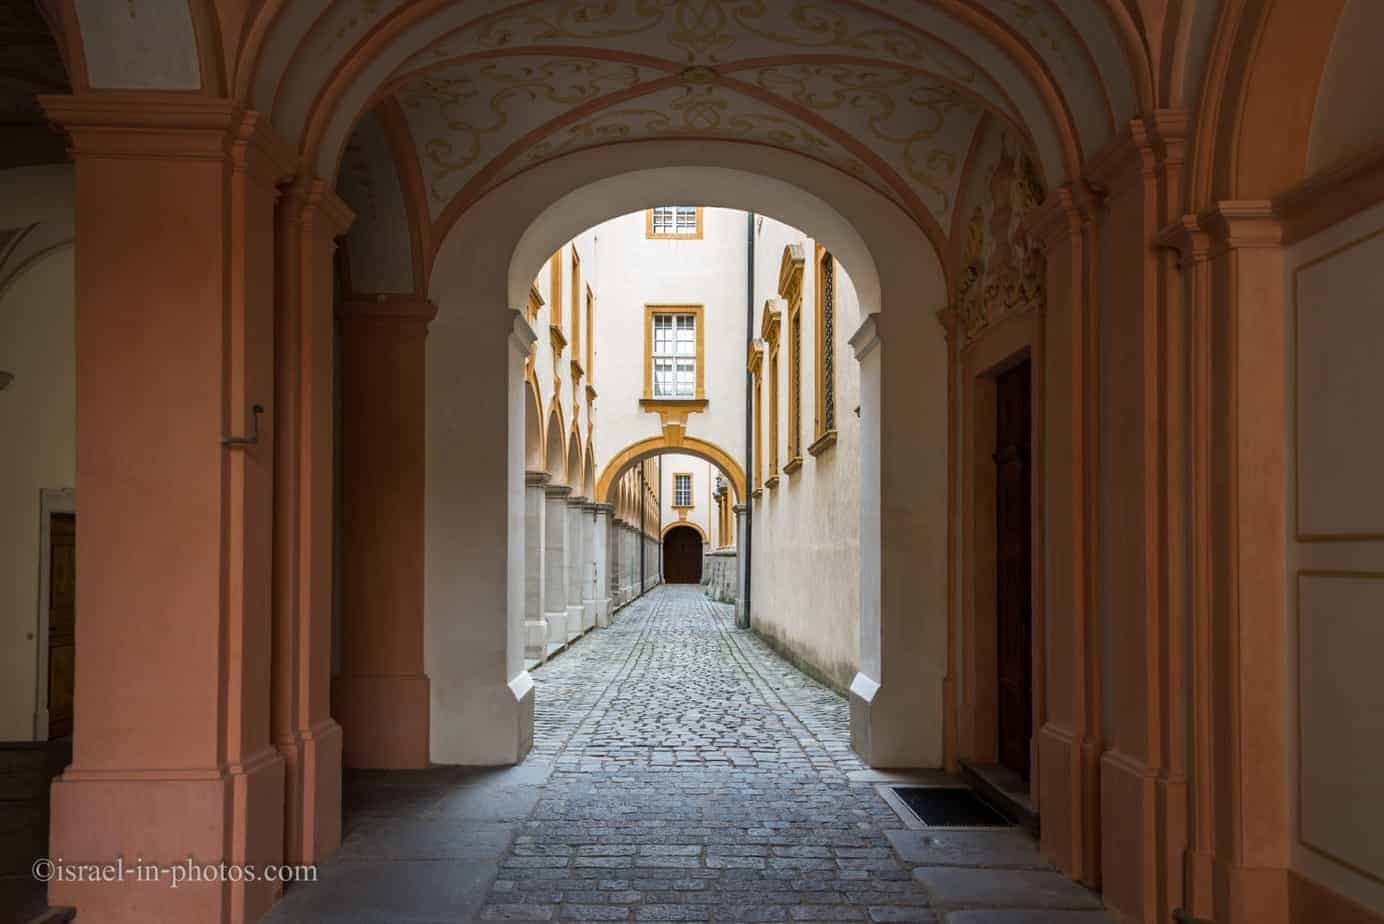 Visiting Melk Abbey and city, Austria